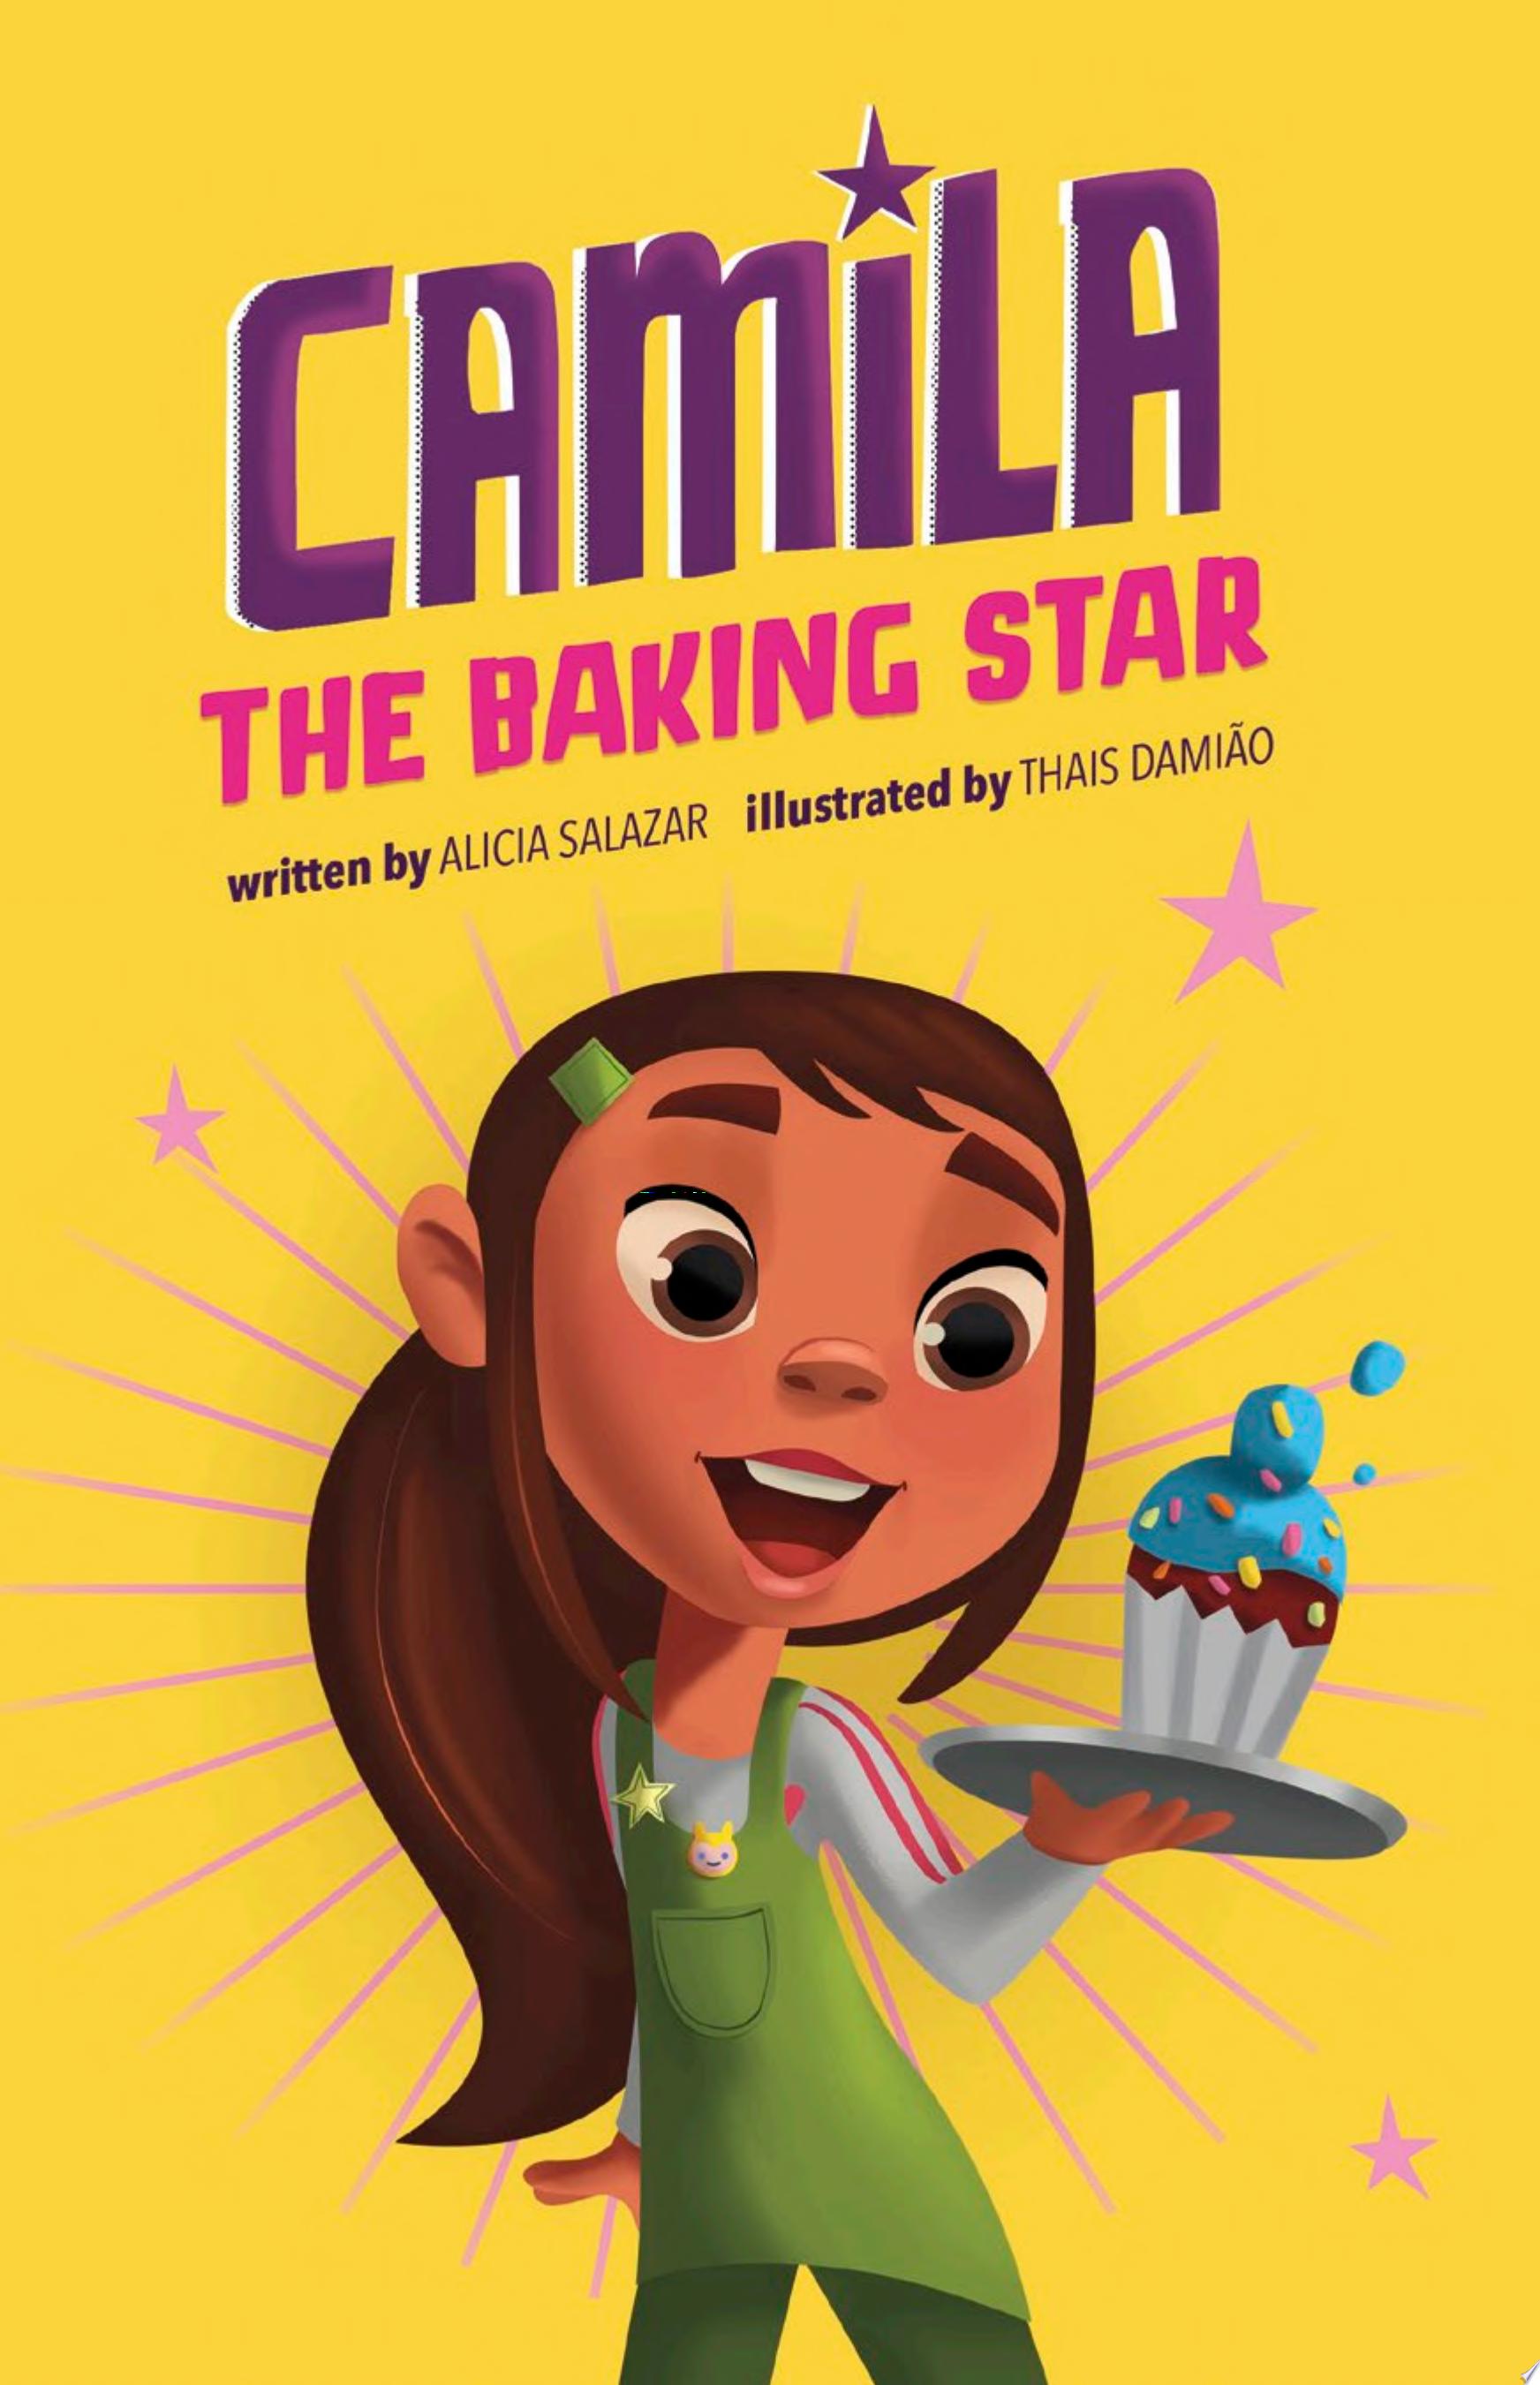 Image for "Camila the Baking Star"